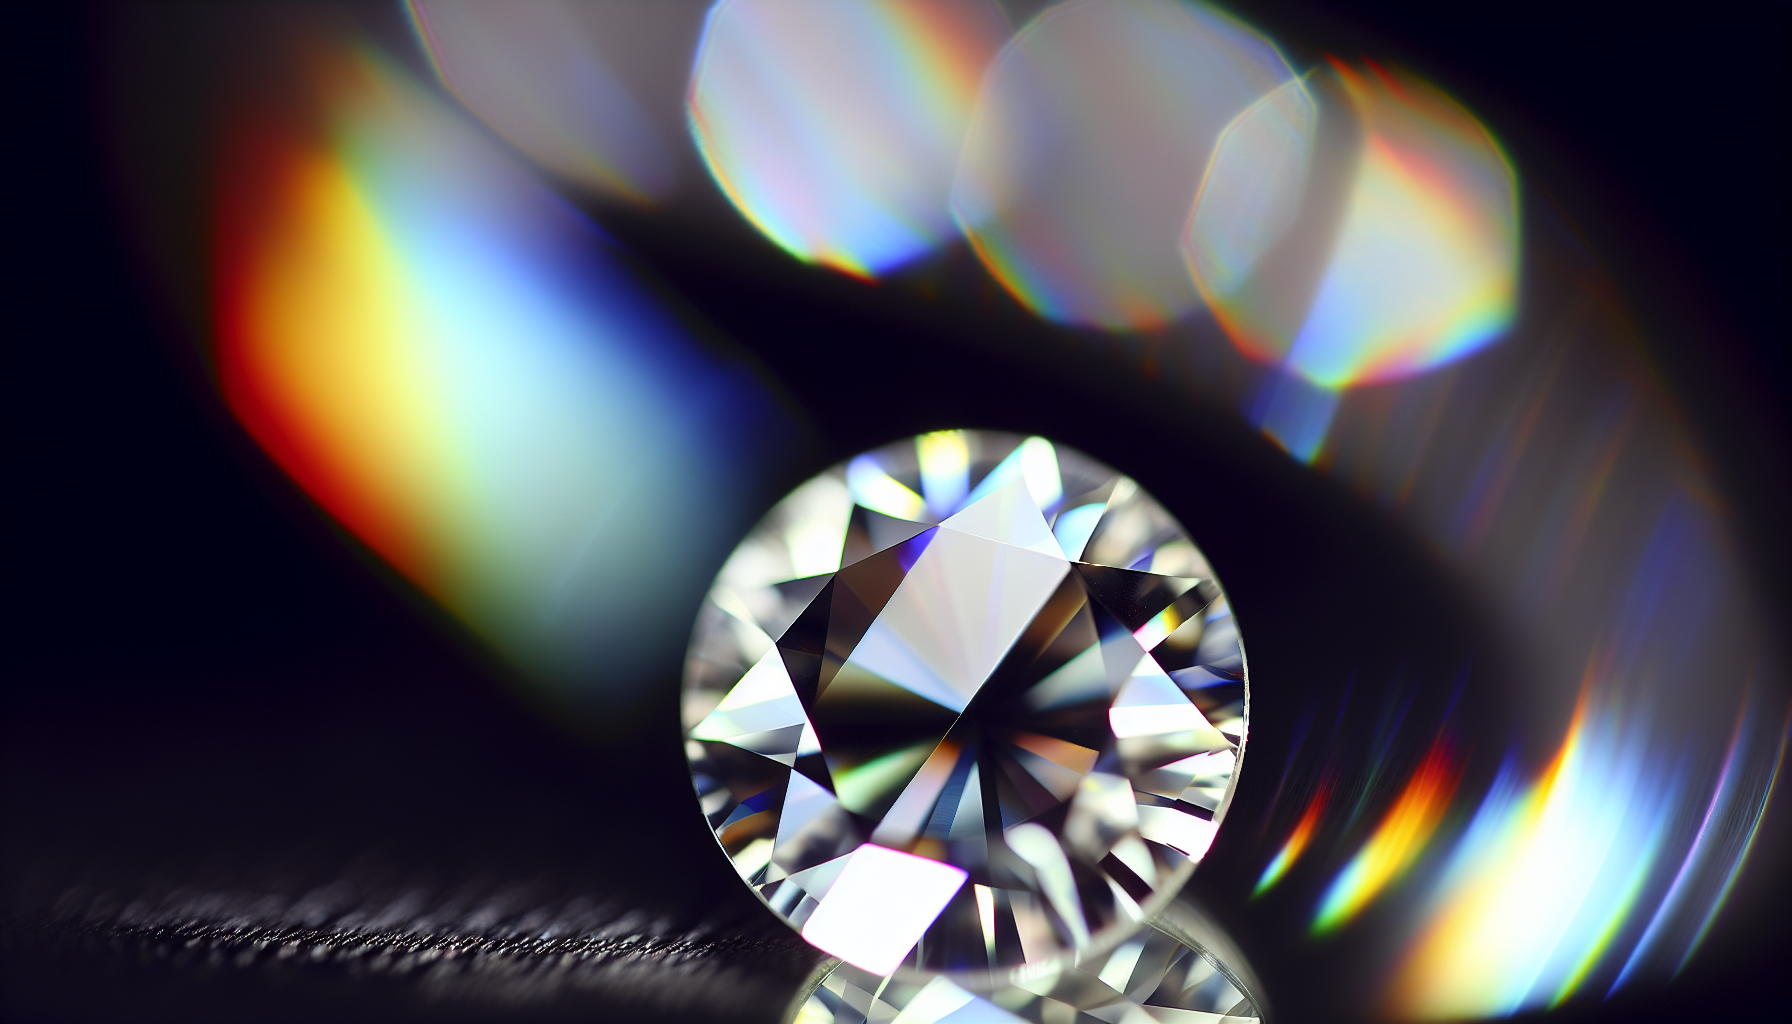 Close-up of a moissanite gemstone with exceptional brilliance and fire